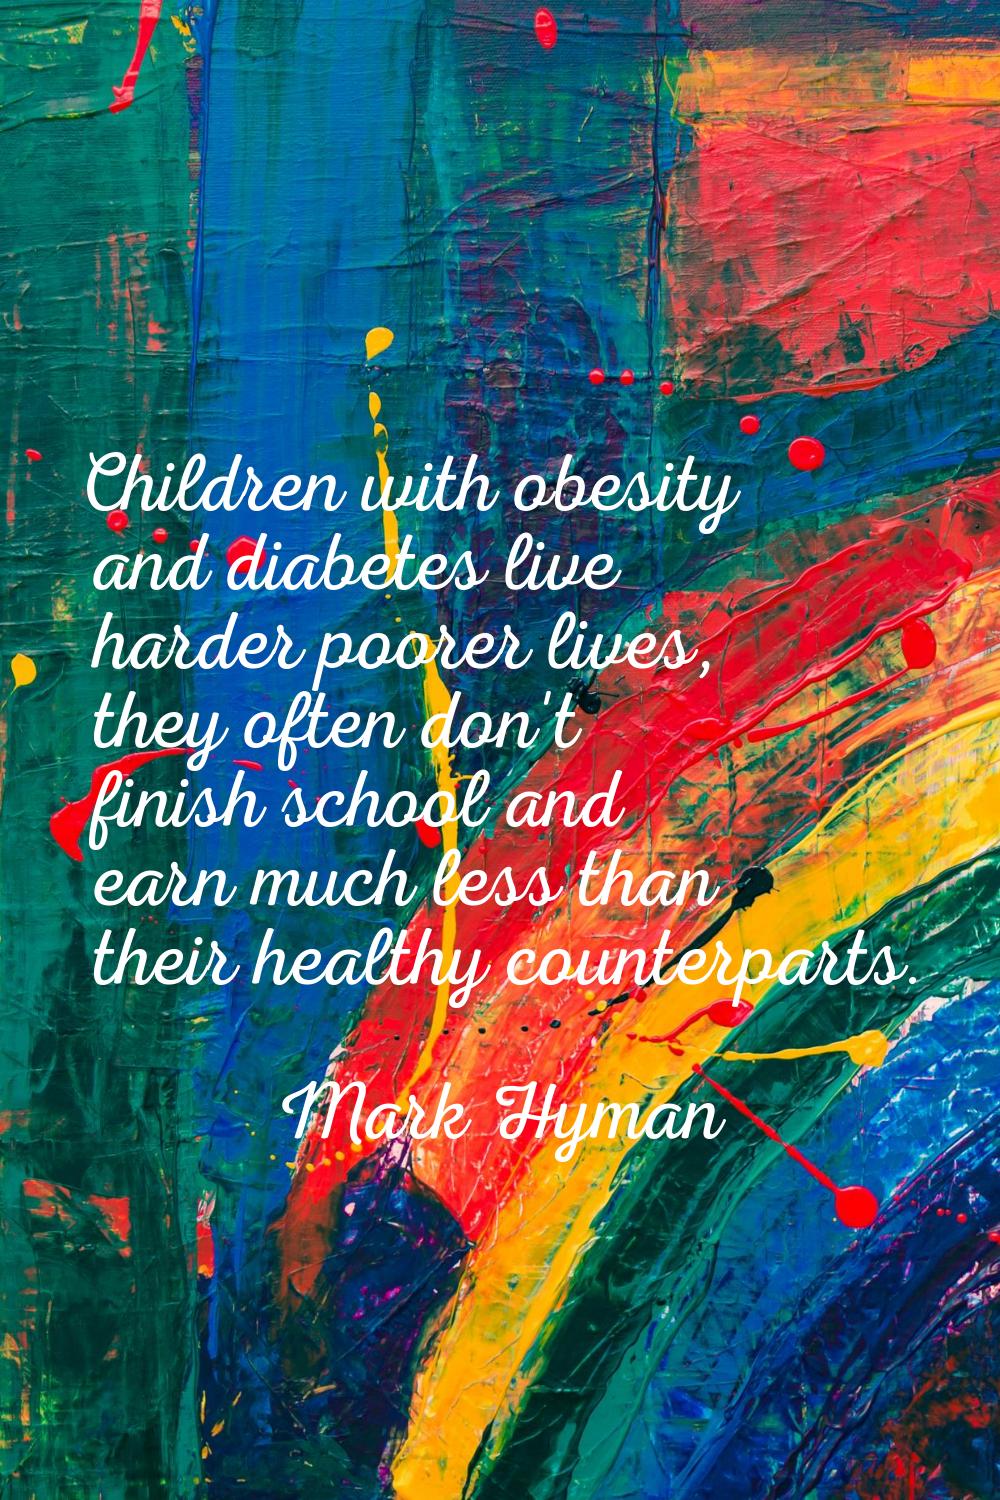 Children with obesity and diabetes live harder poorer lives, they often don't finish school and ear